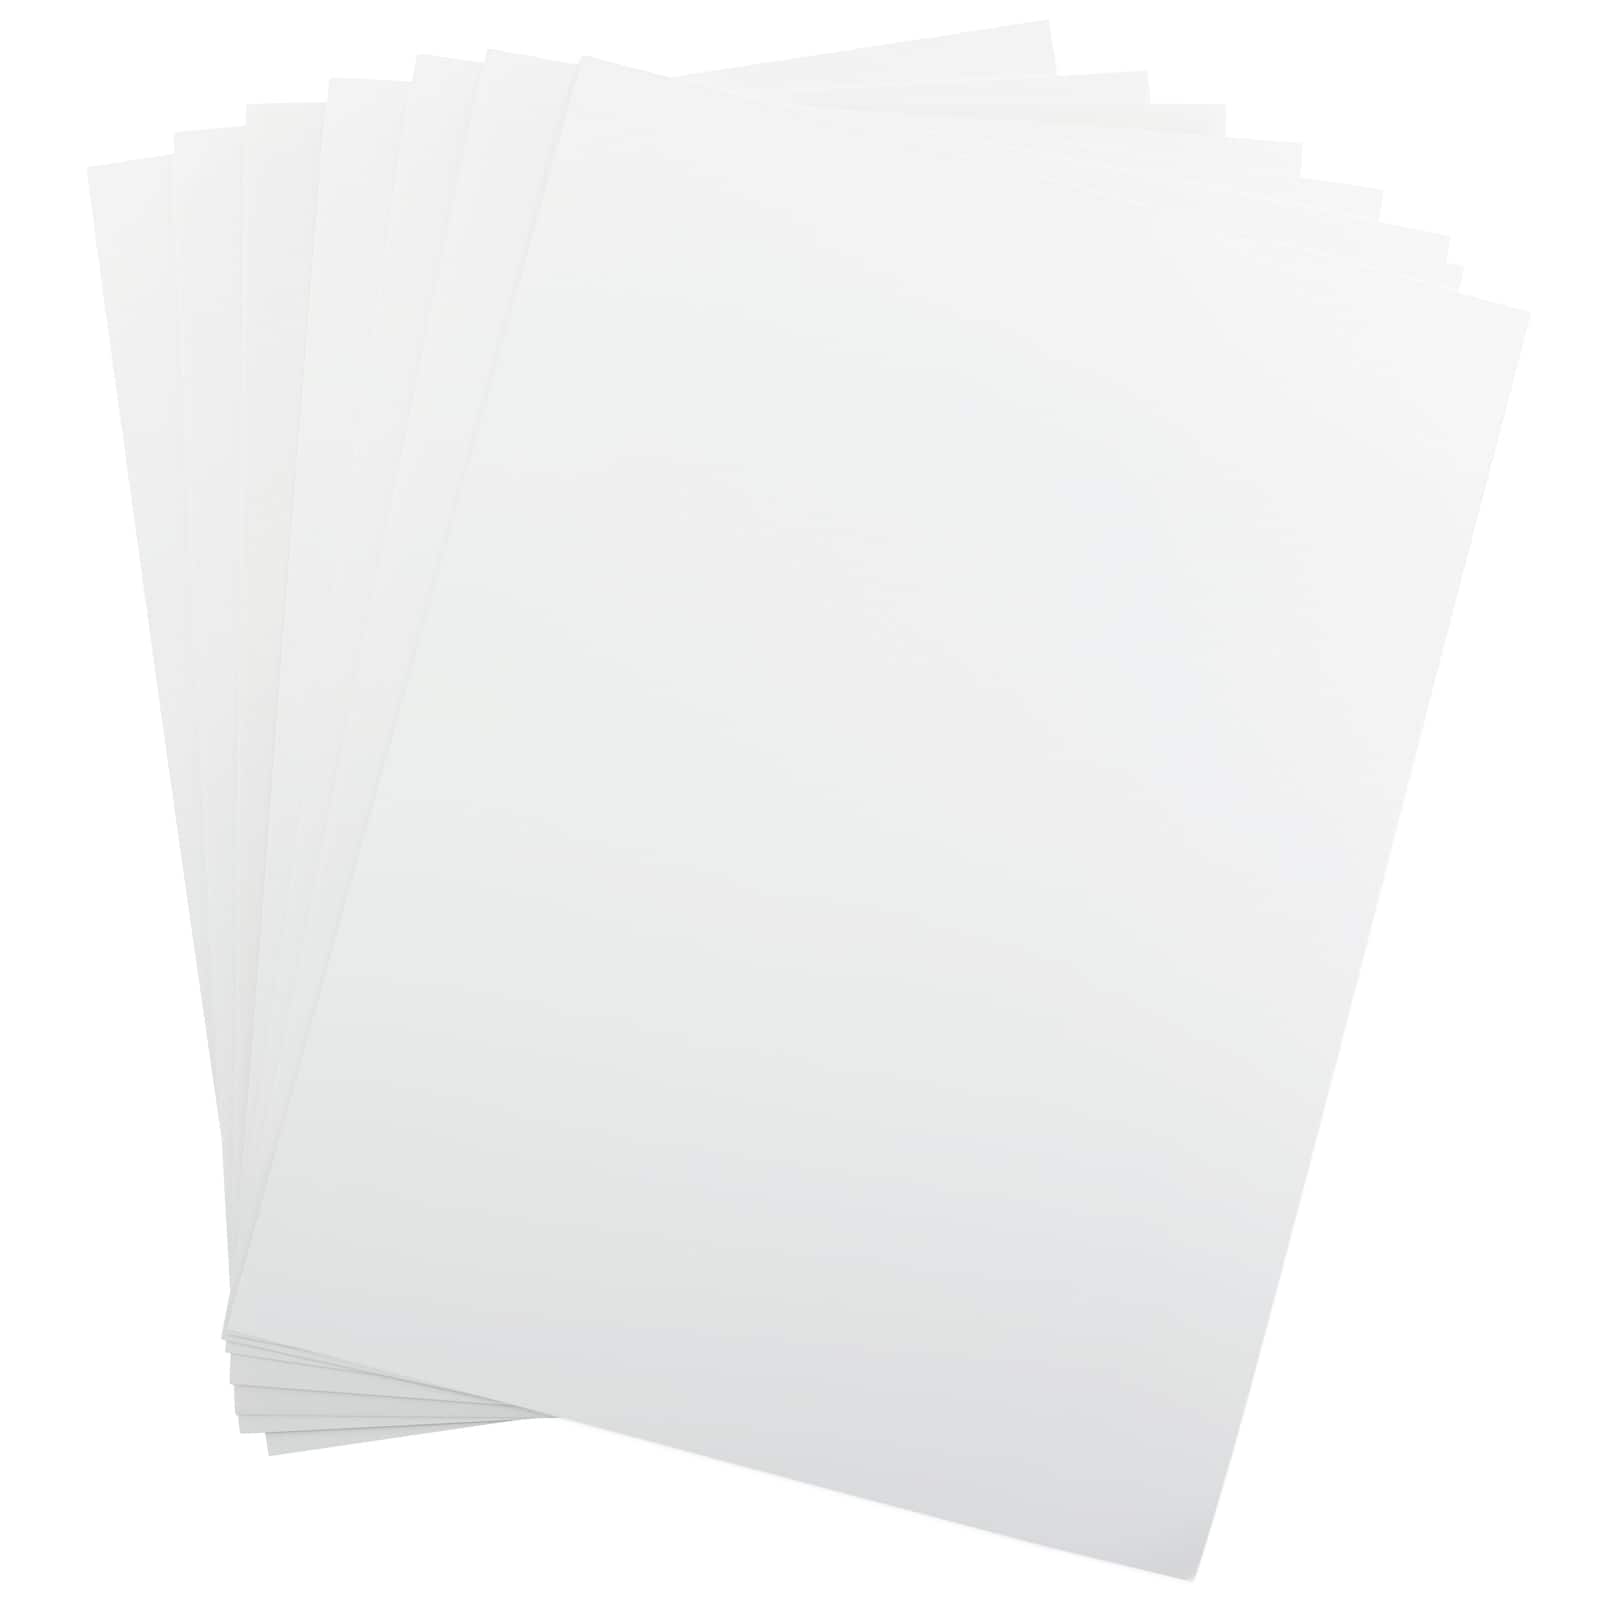 Yupo Watercolor Pads 9 x 12 10 Sheets Pack Of 2 - Office Depot